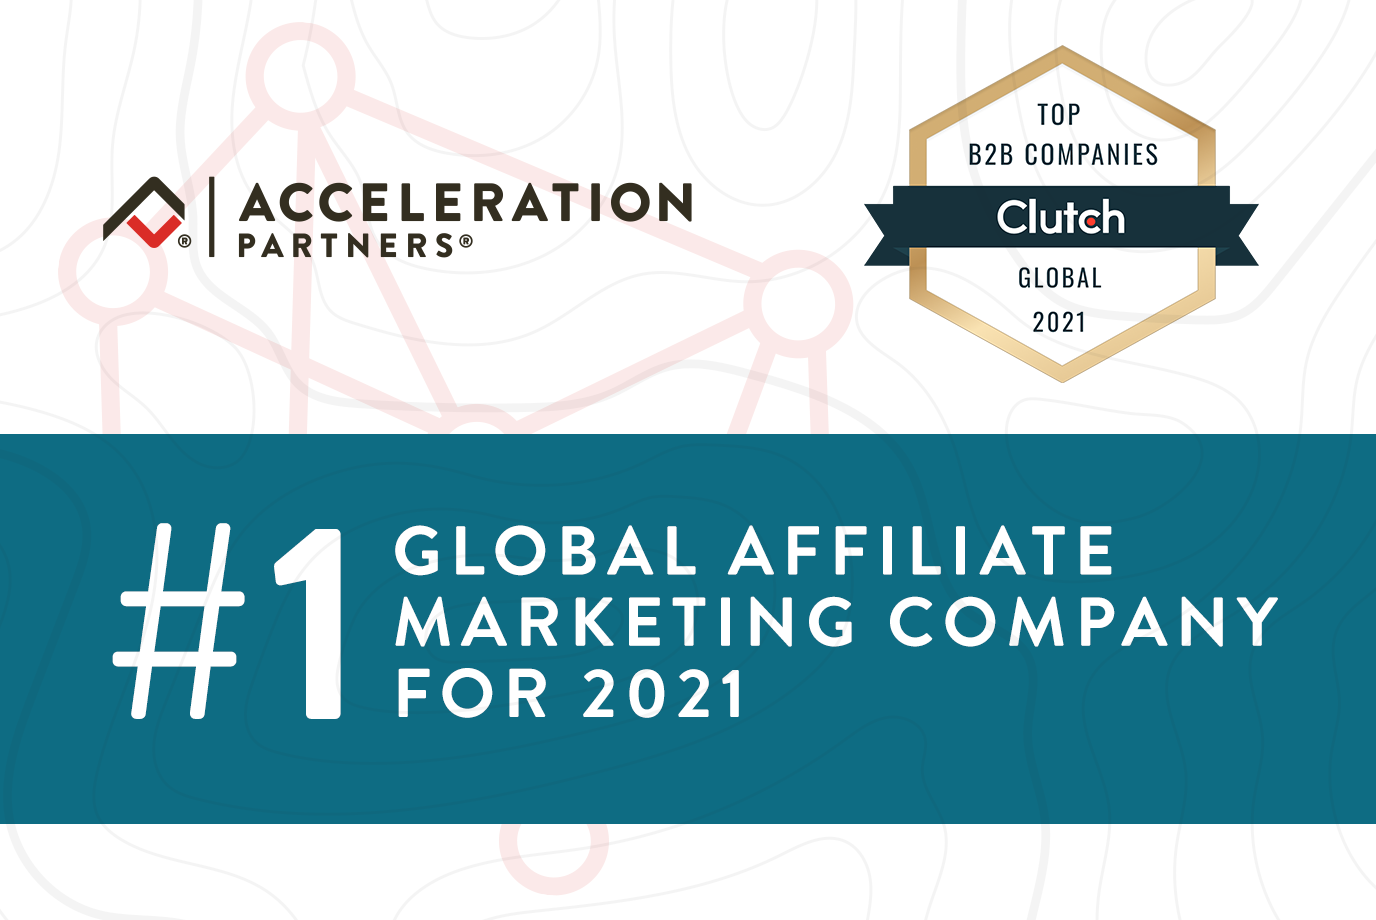 Clutch names Acceleration Partners #1 Global Affiliate Marketing Company for 2021